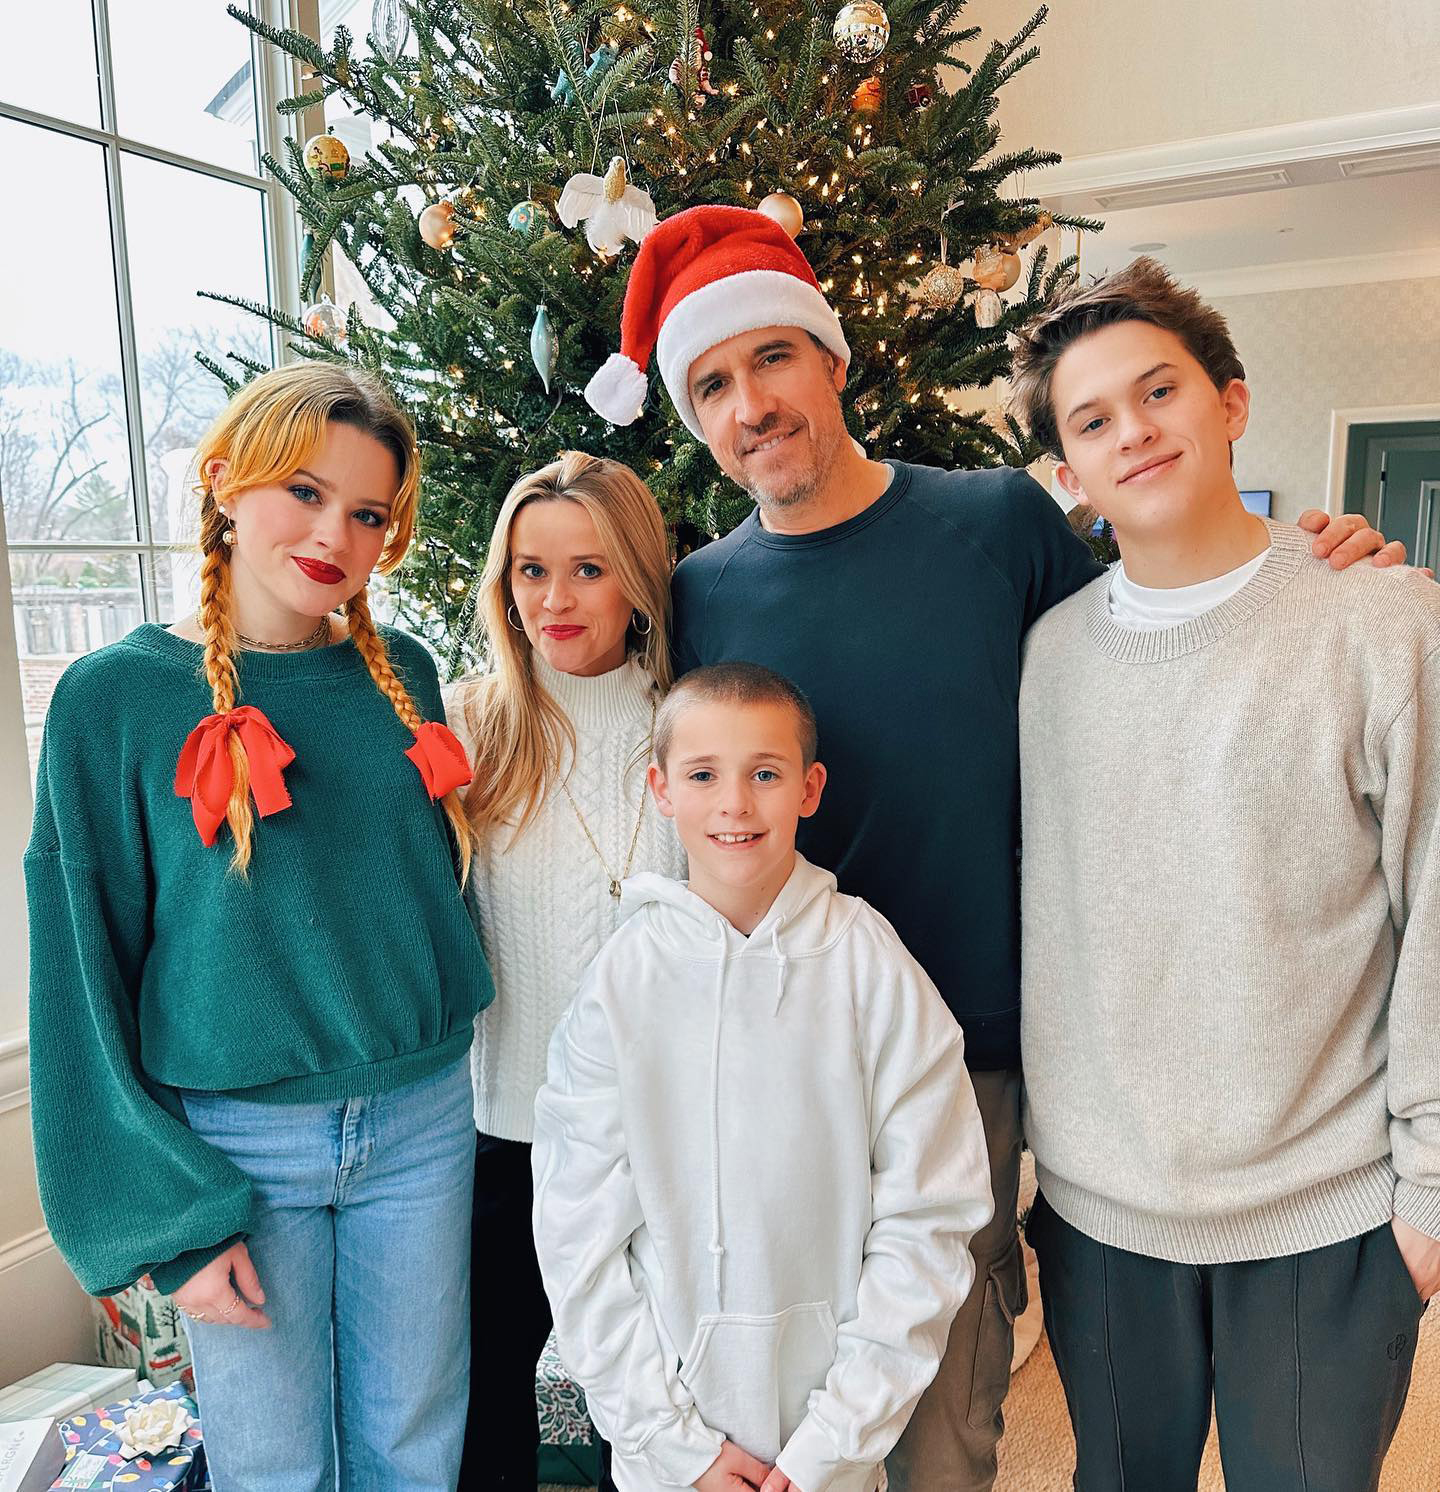 Reese Witherspoons Best Photos With Her 3 Kids Over The Years Dec 2022 01 ?w=1440&quality=86&strip=all